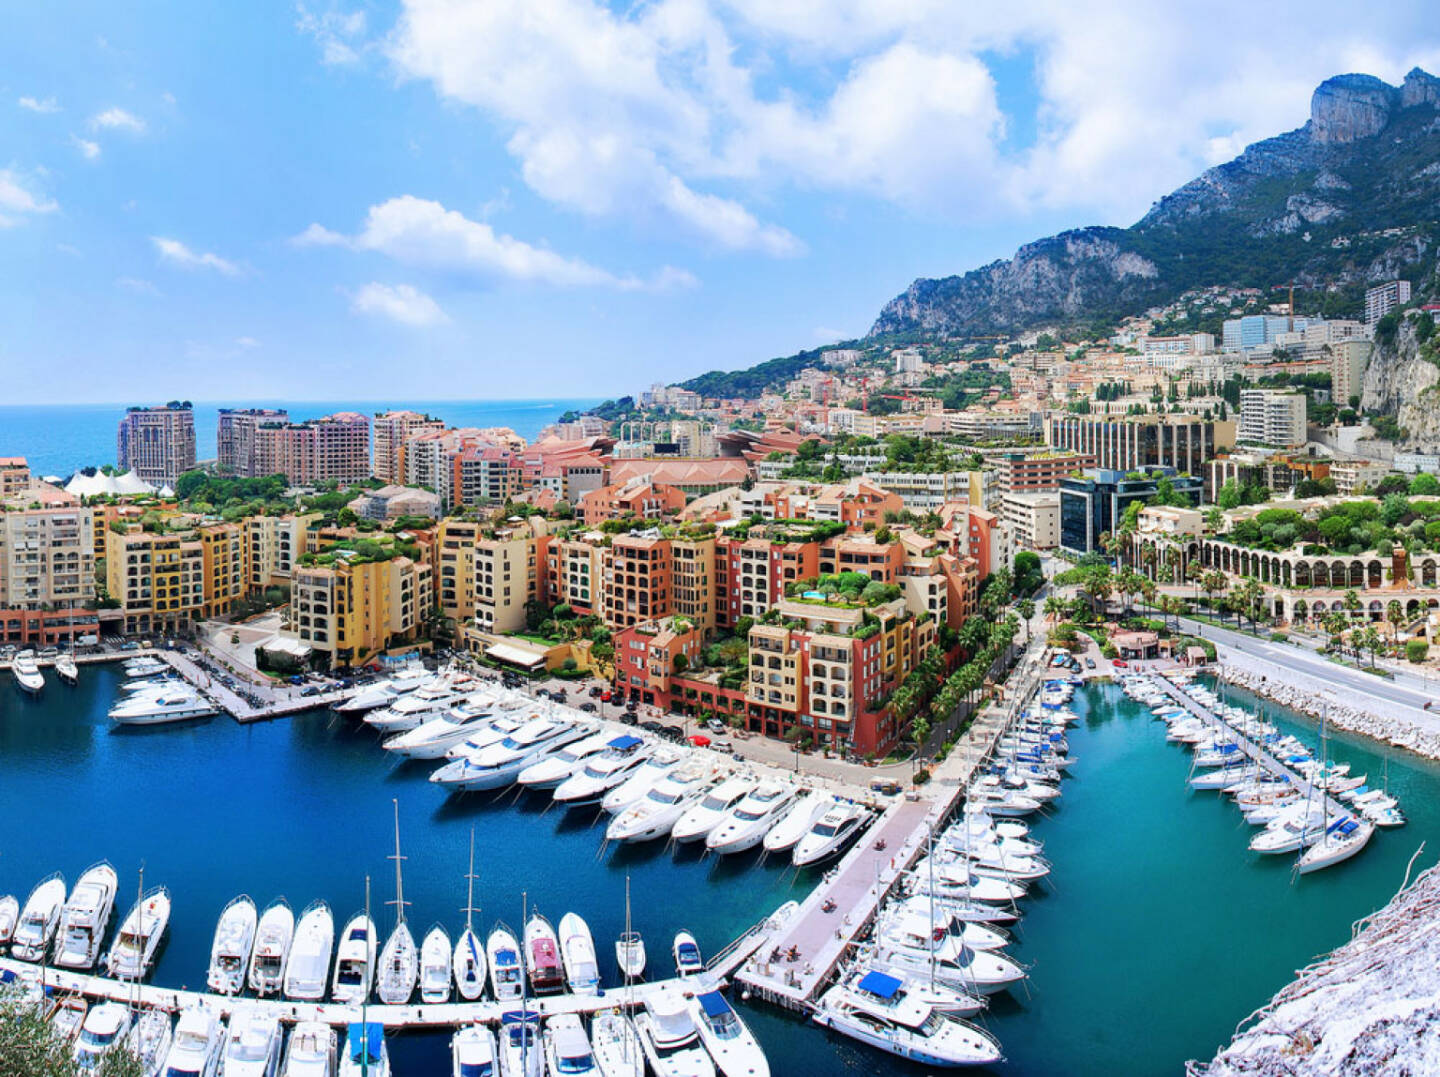 Monaco, Hafen, Yachten, http://www.shutterstock.com/de/pic-134088284/stock-photo-view-of-luxury-yachts-and-apartments-in-harbor-of-monaco-cote-d-azur-panorama.html